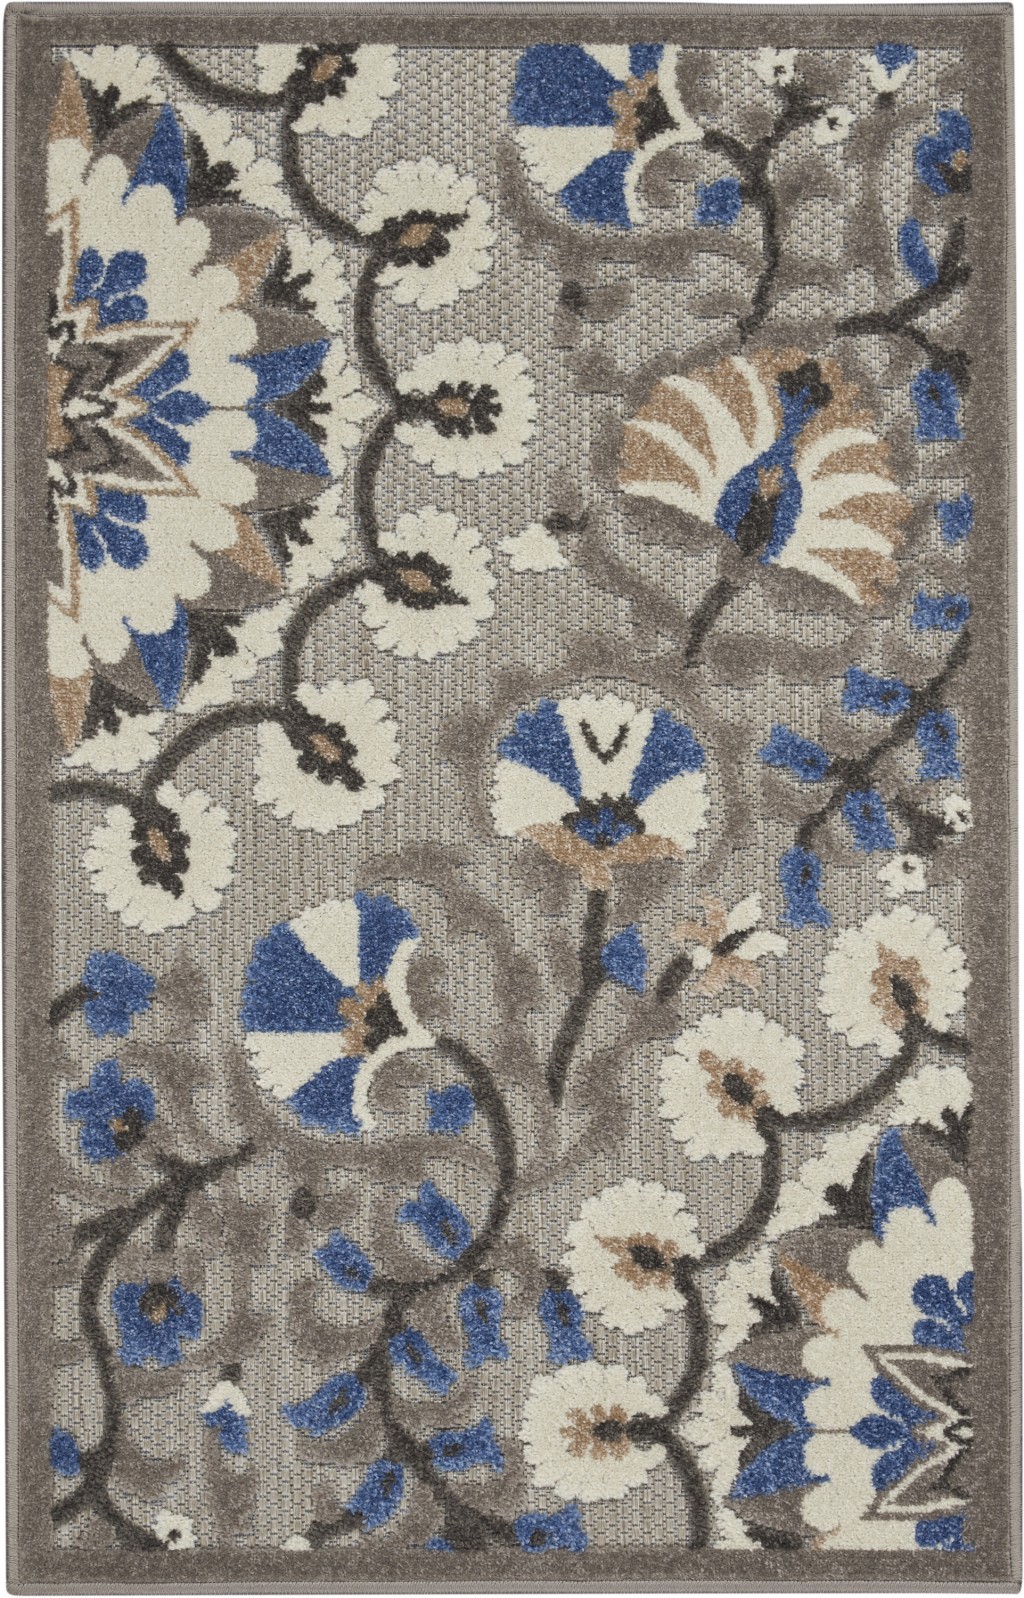 3' X 4' Blue And Gray Floral Indoor Outdoor Area Rug-384986-1